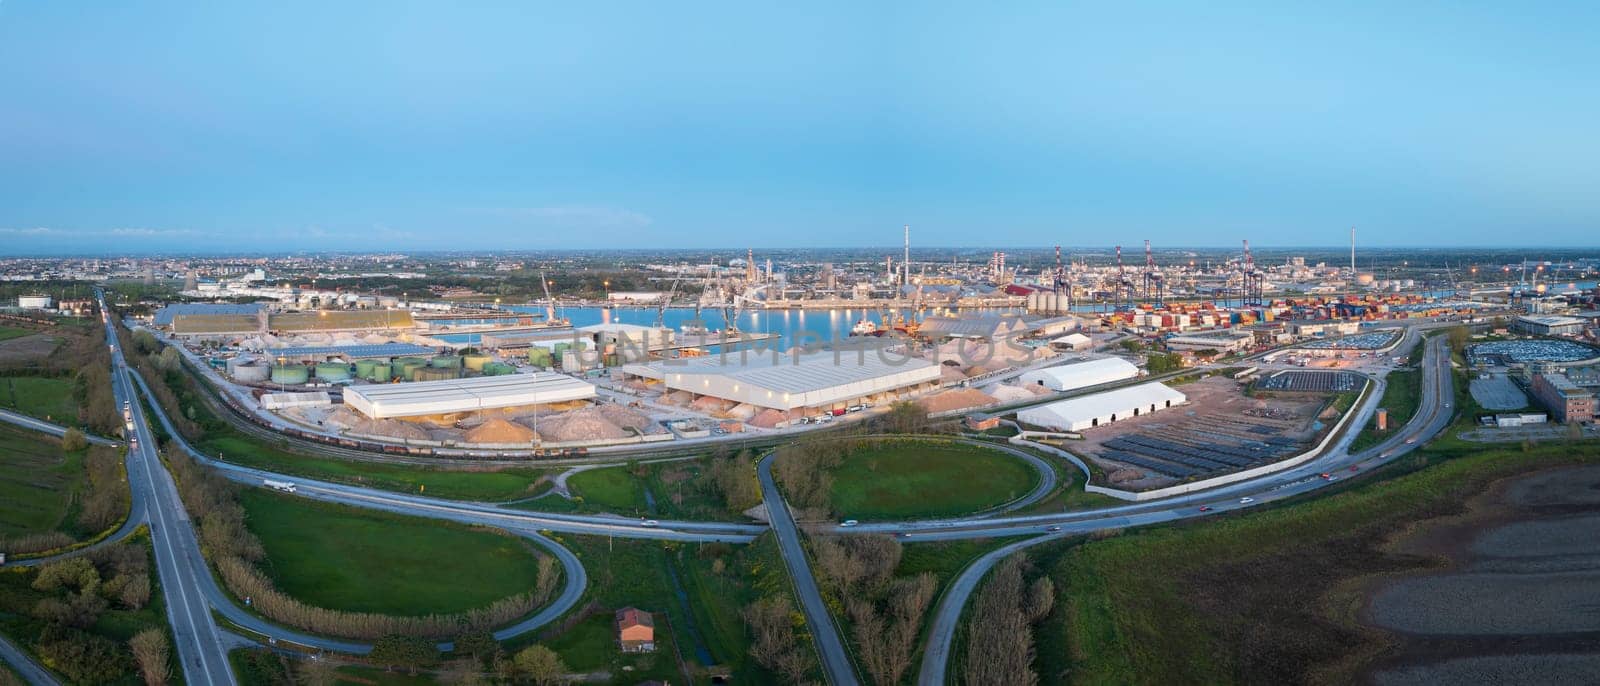 Panorama of hydrocarbon refinery and liquefied natural gas tanks by Robertobinetti70